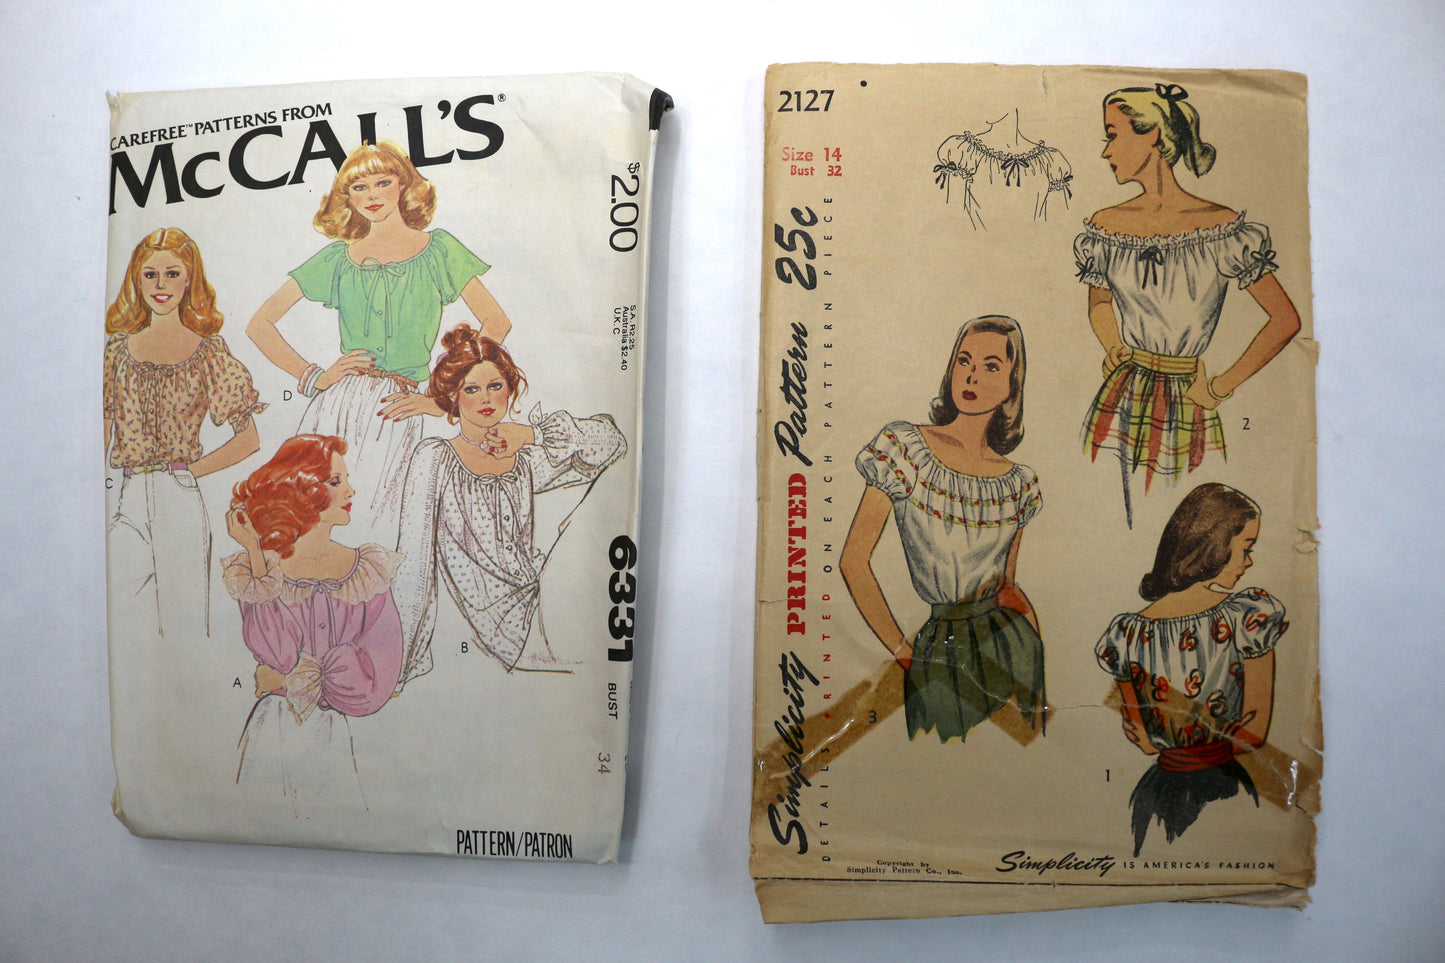 McCalls 6331 Sewing Pattern or Simplicity 2127 Sewing Pattern